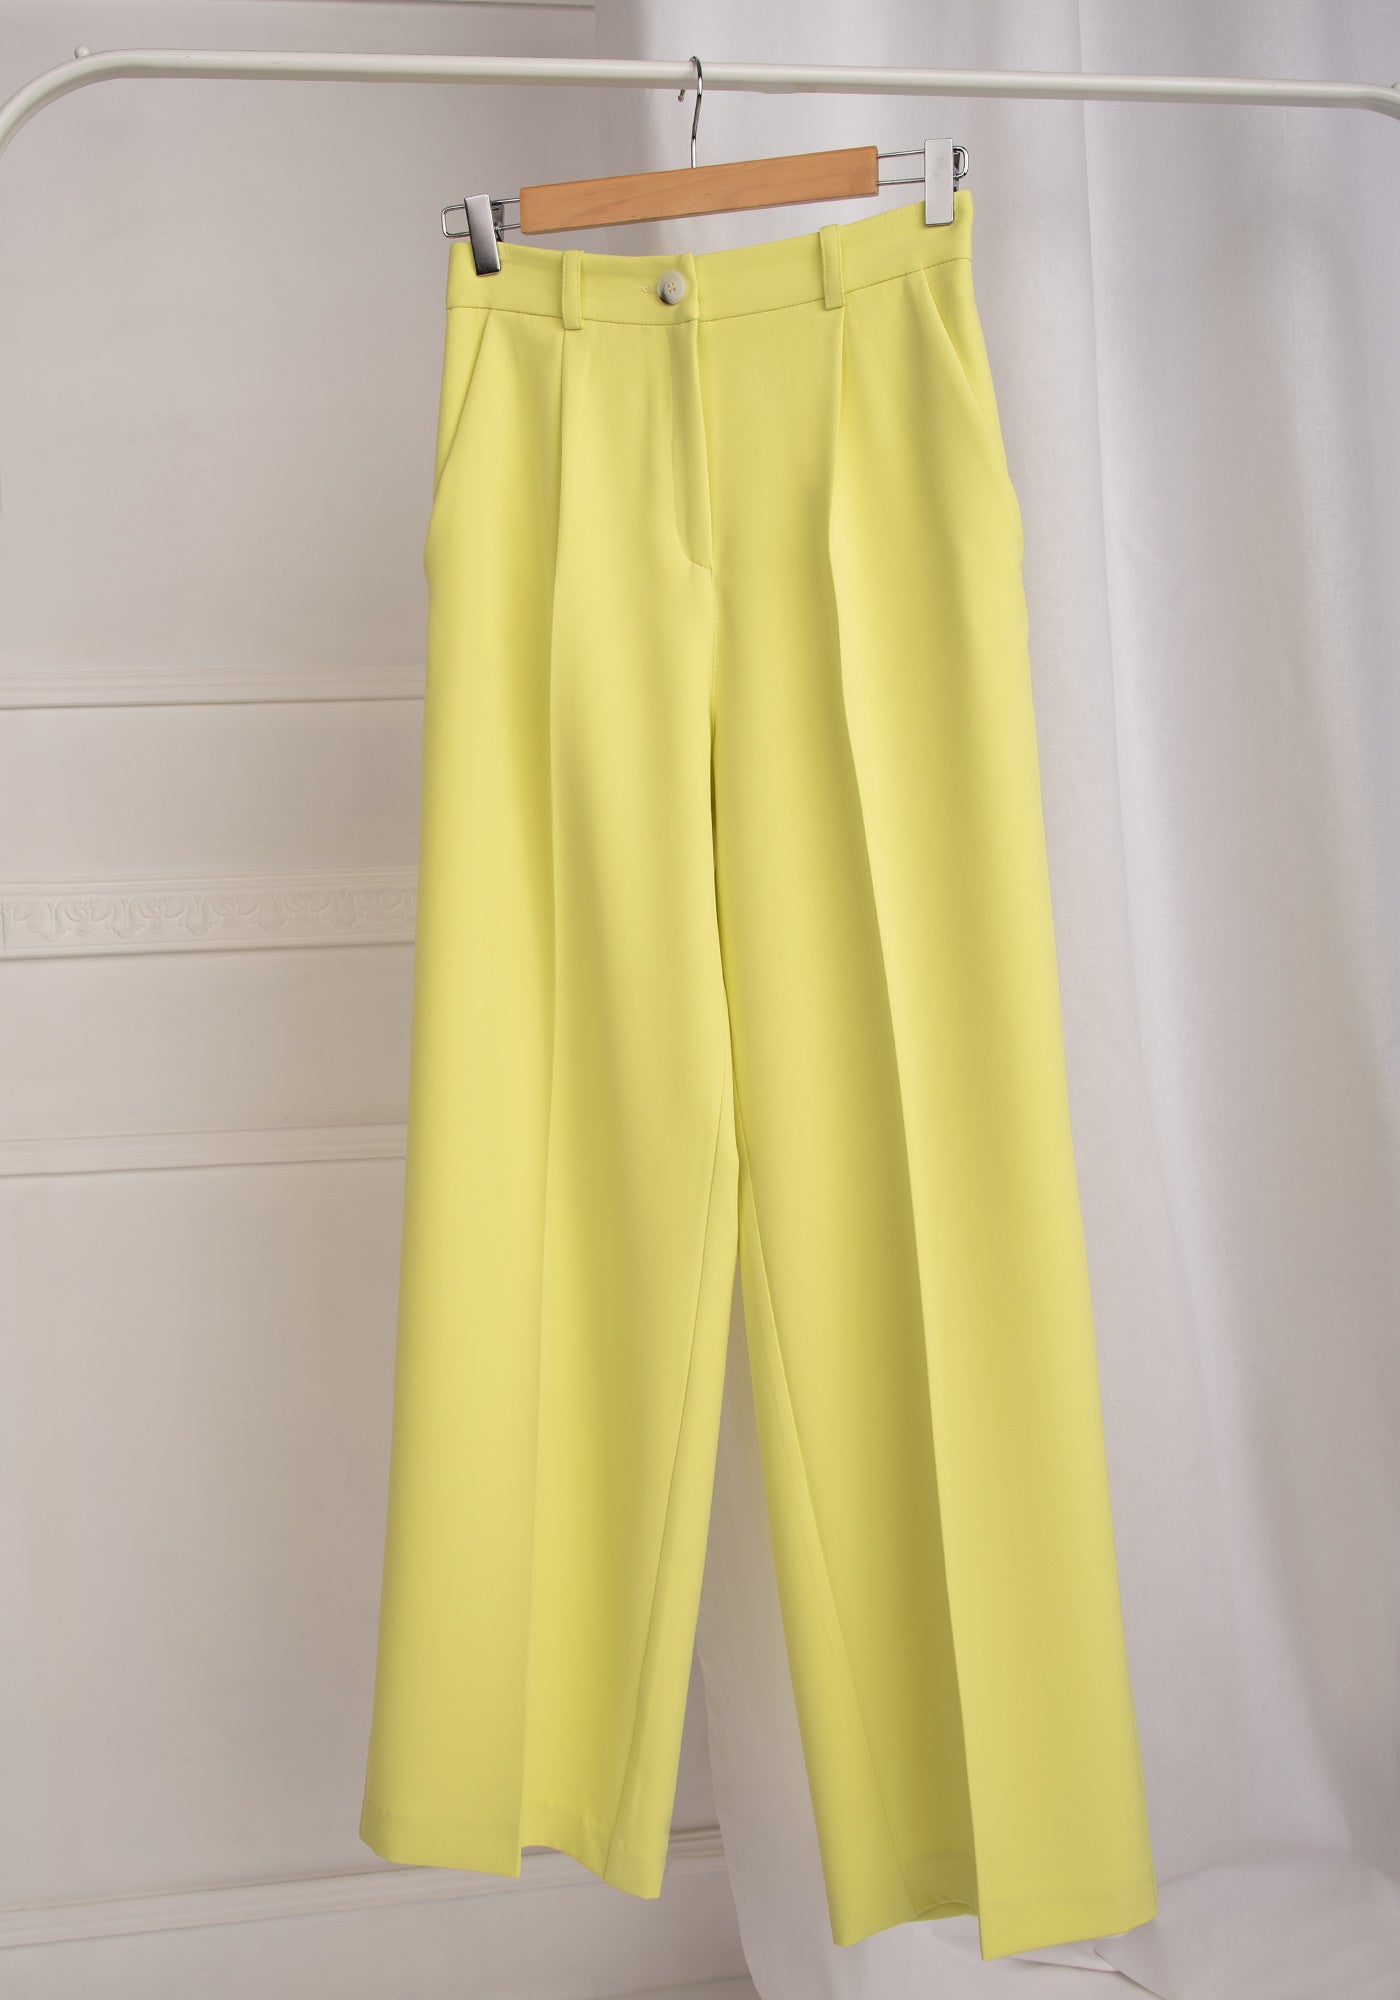 Women's Wide Leg Pleated High Waist Trousers in Lime